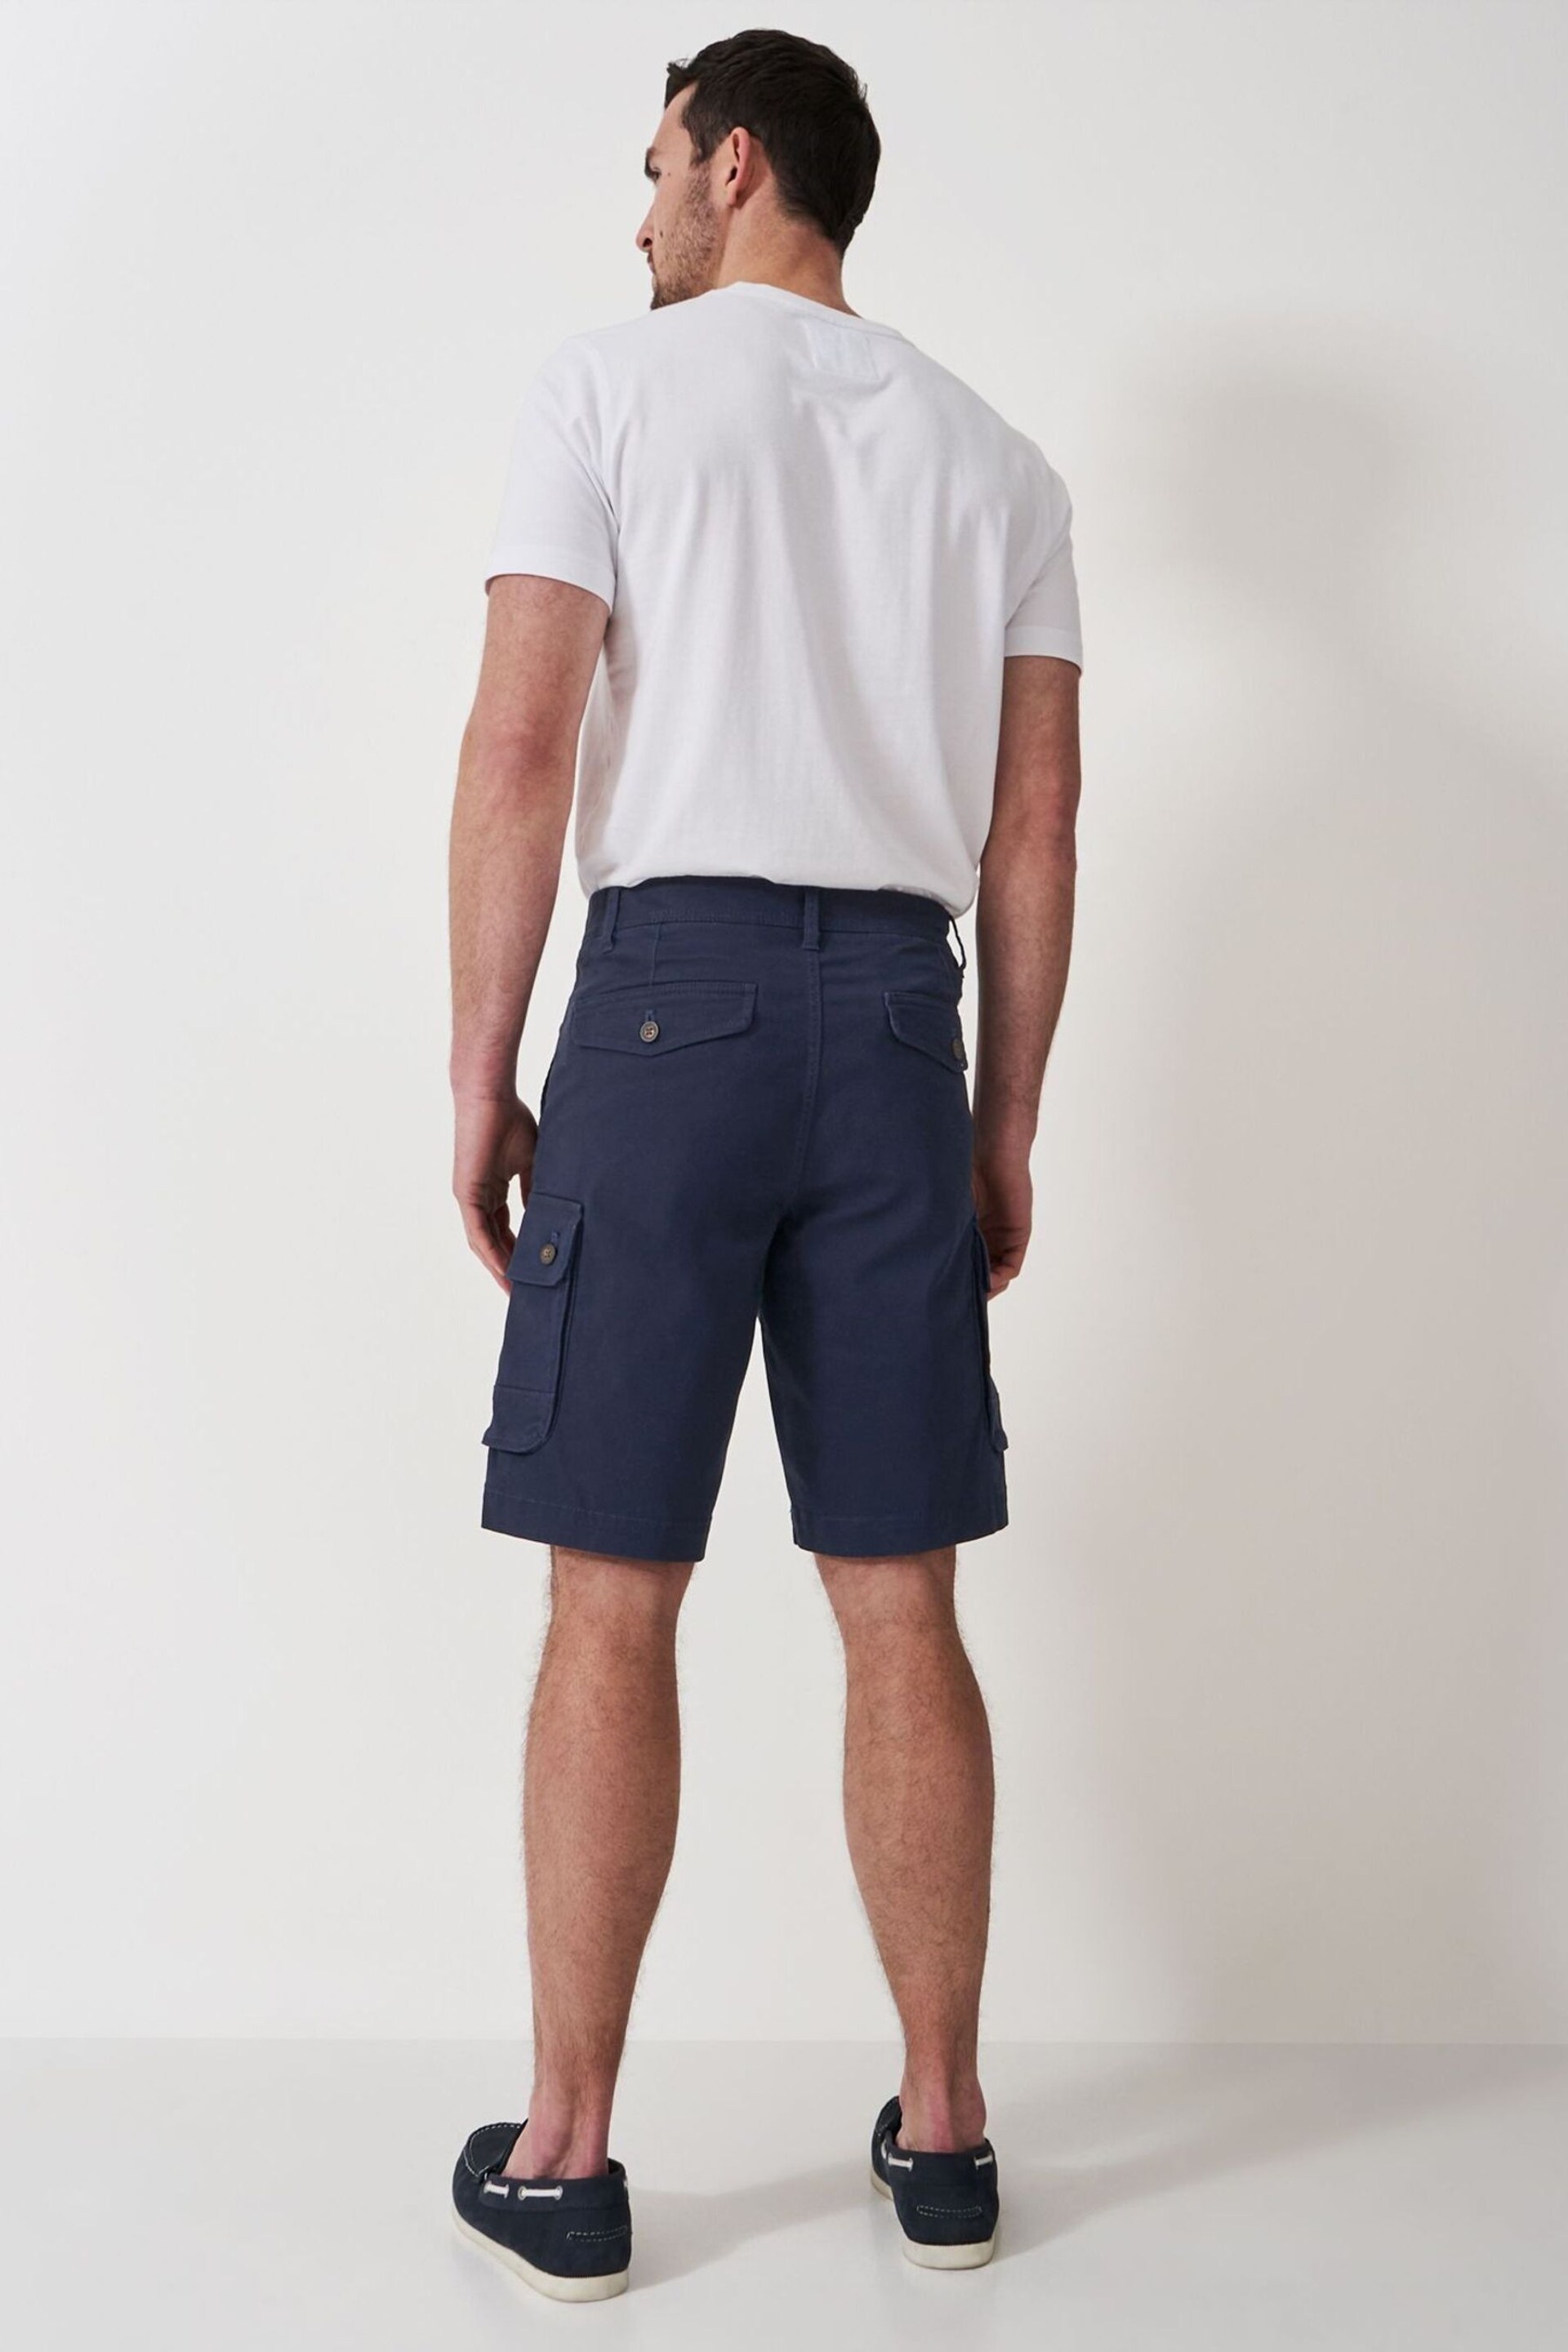 Crew Clothing Company Blue Cotton Classic Casual Shorts - Image 3 of 5